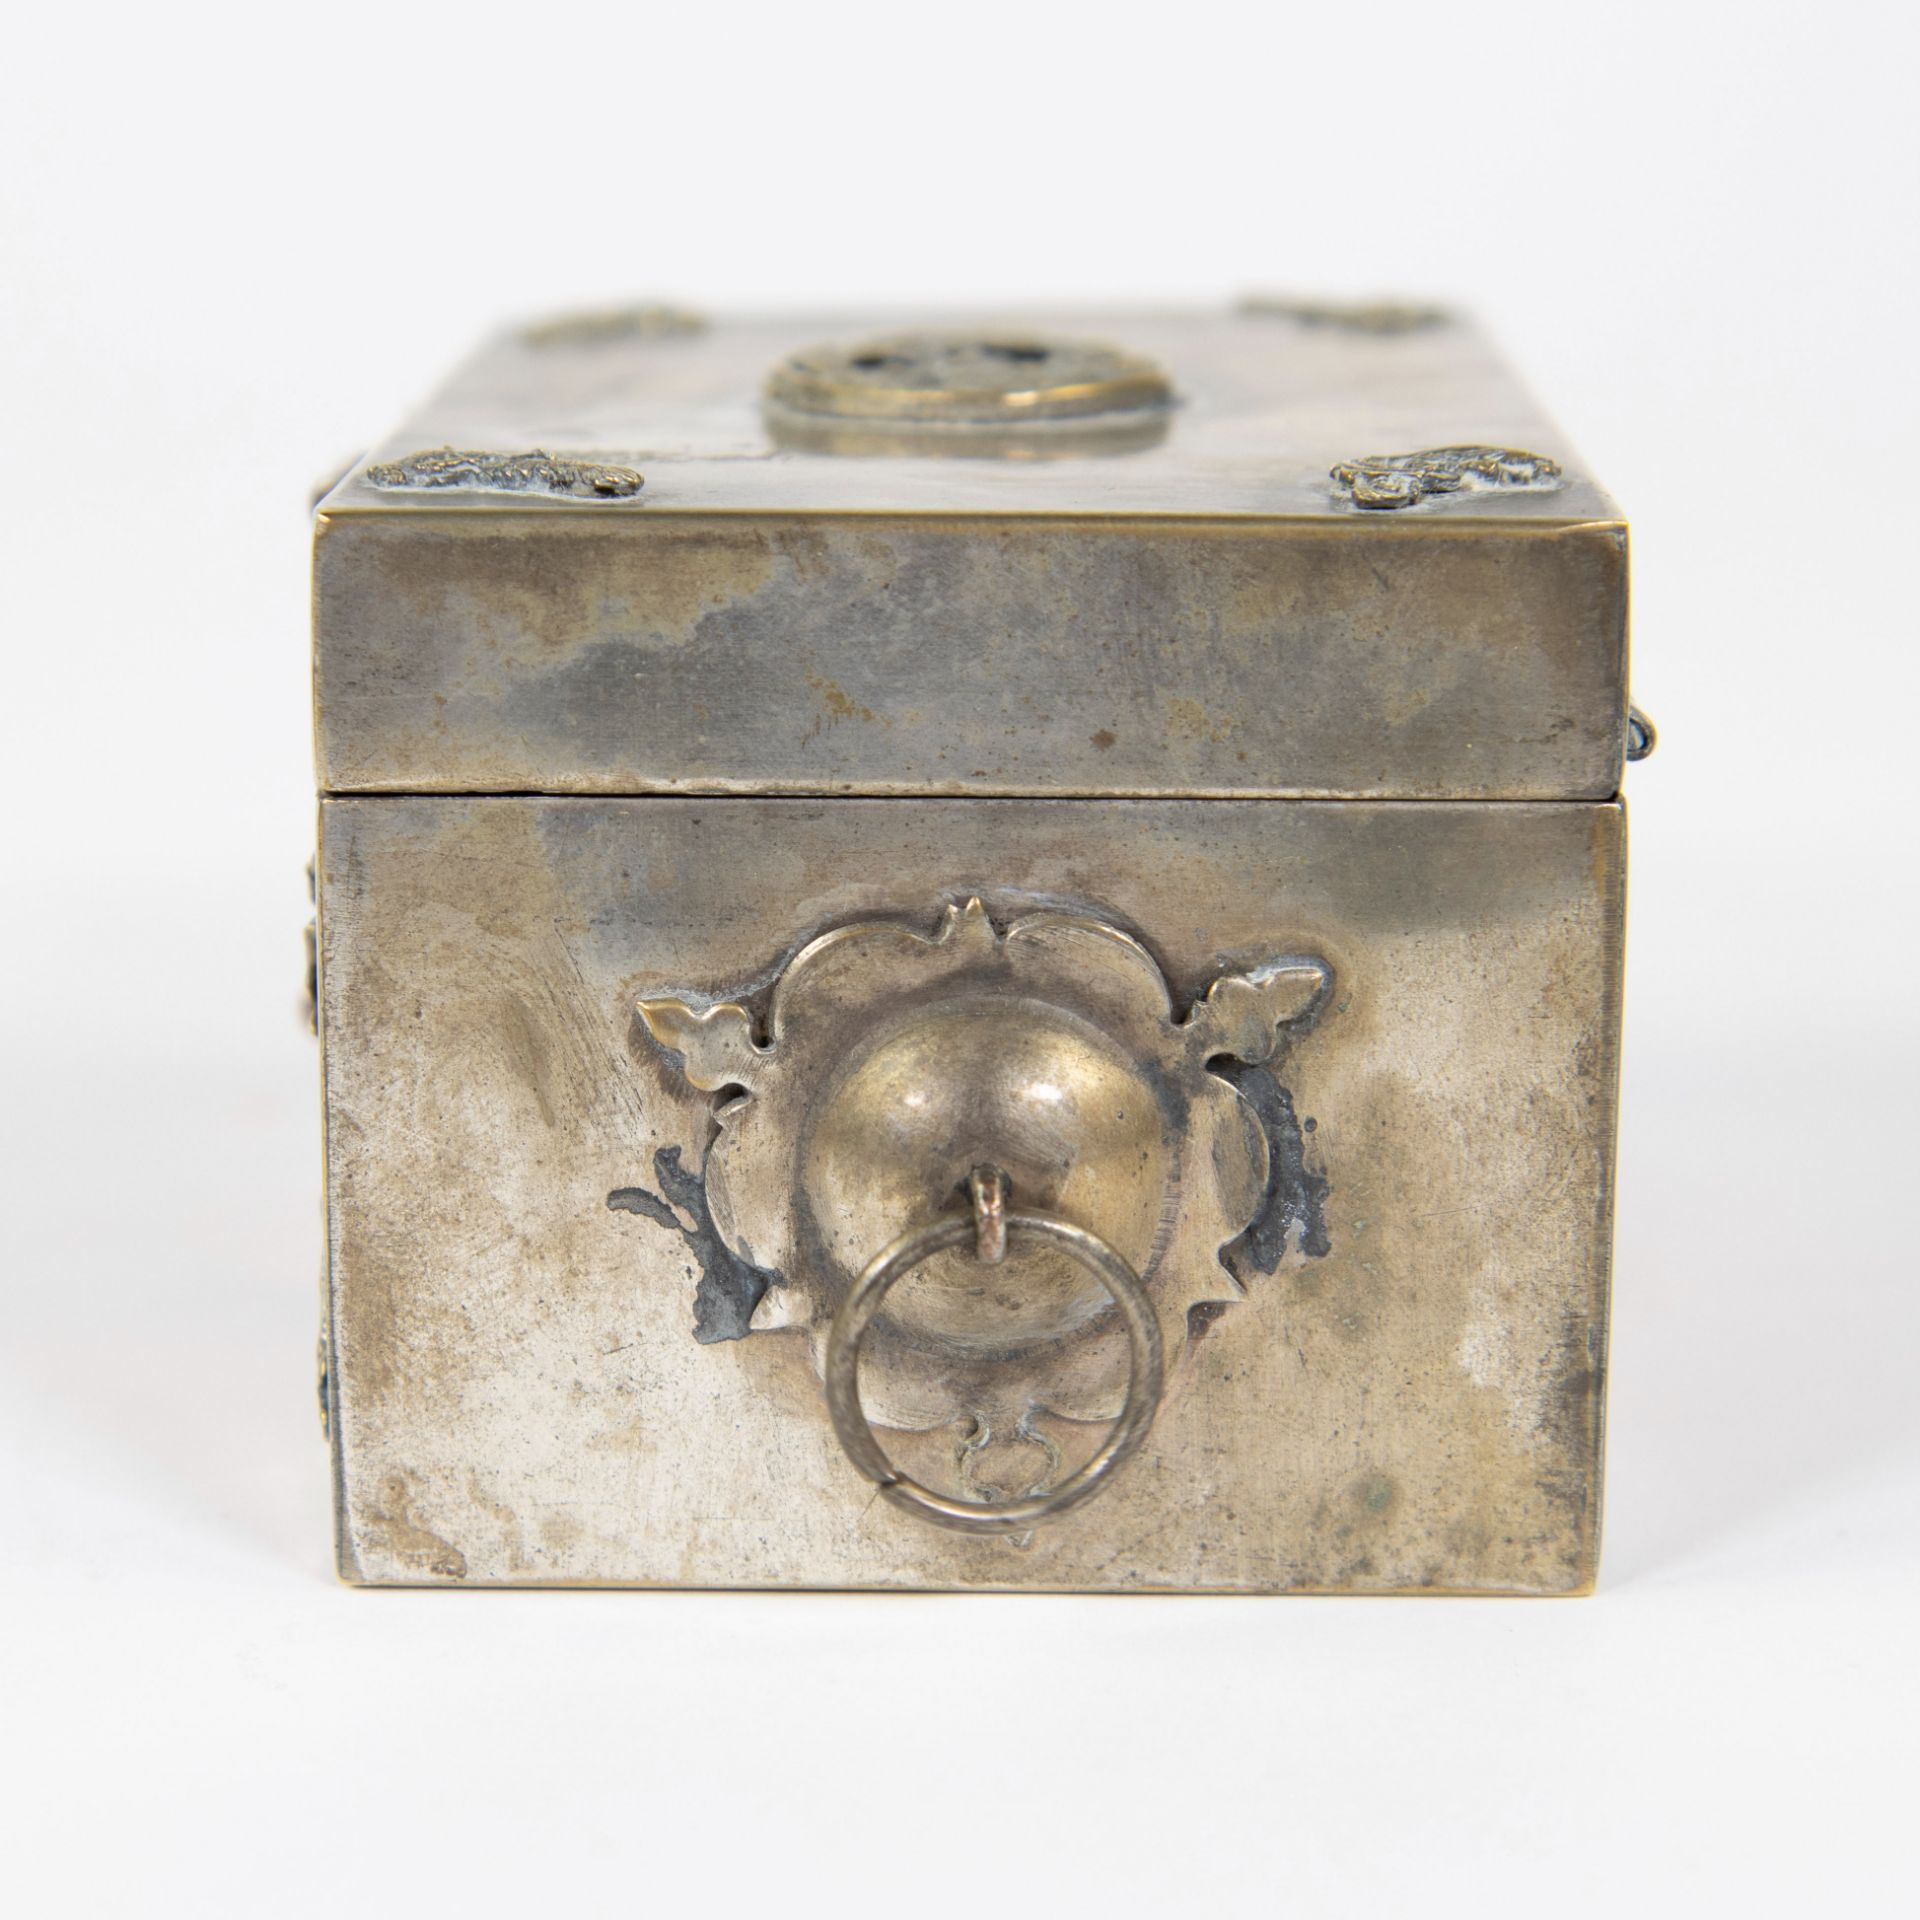 Chinese silver jewelry box - Image 2 of 6